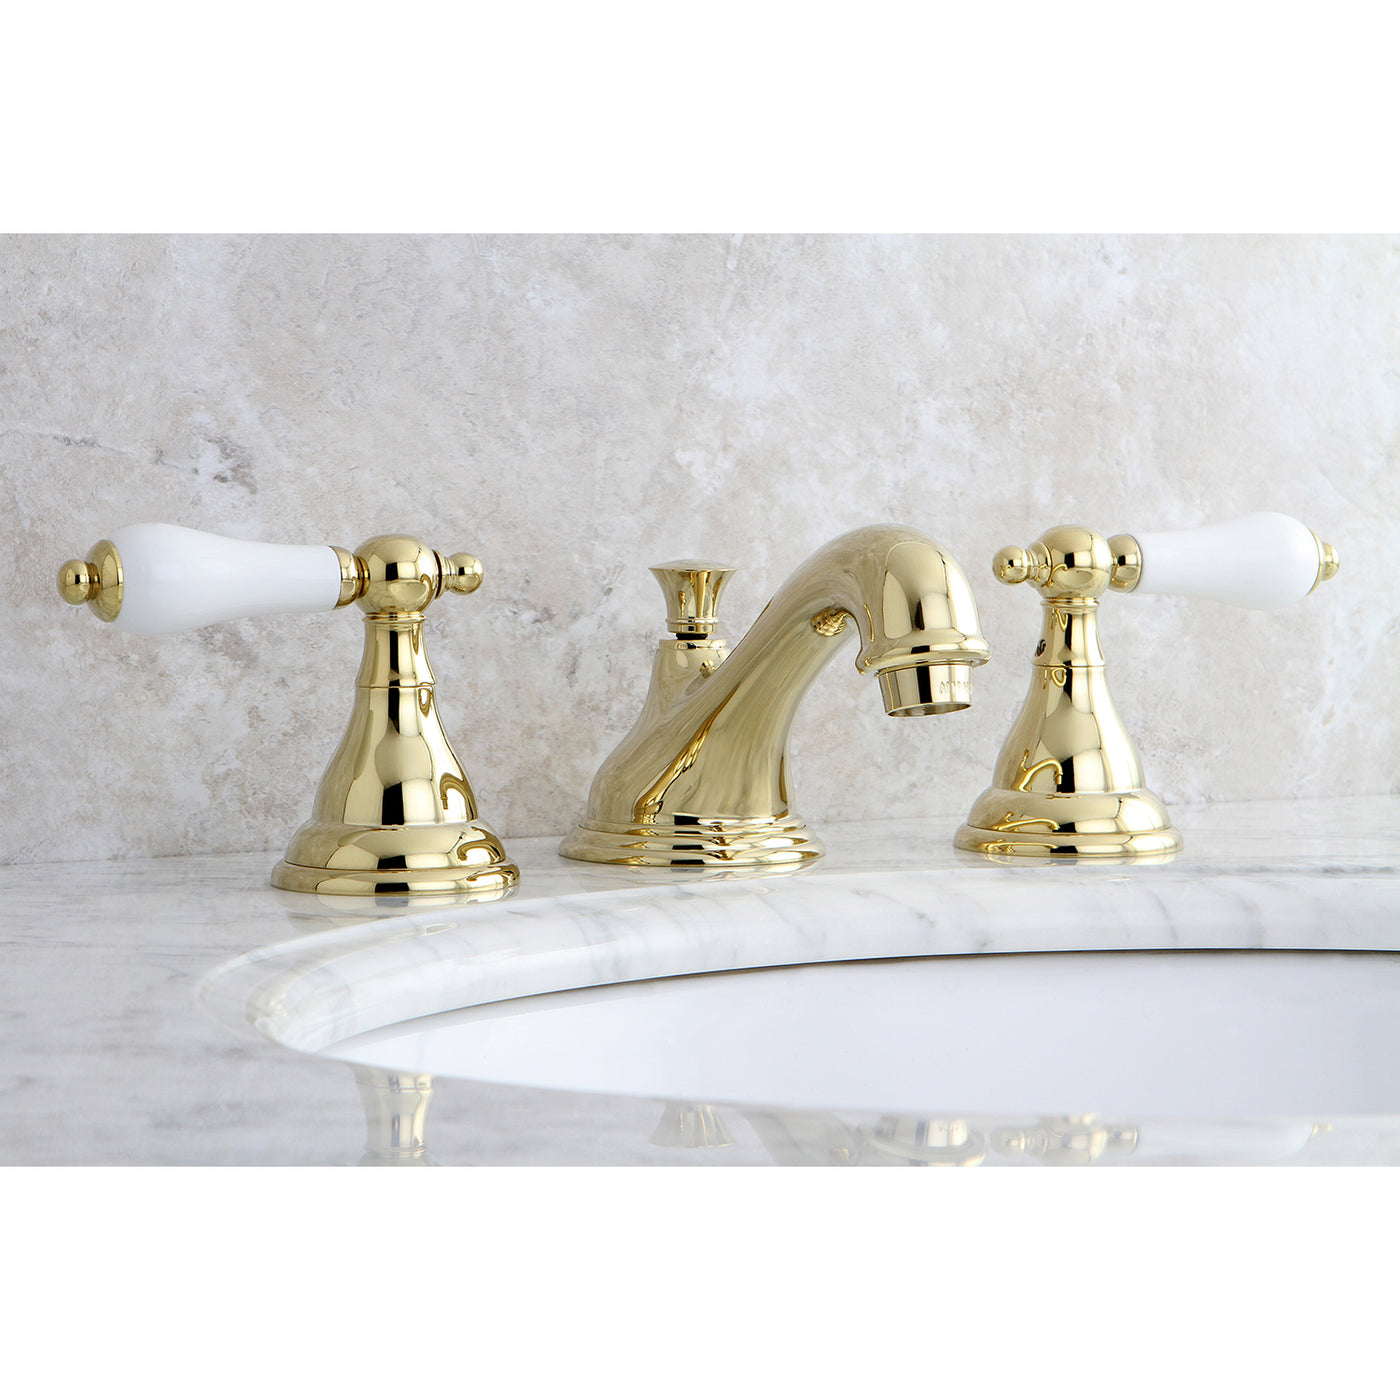 Elements of Design ES5562PL Widespread Bathroom Faucet with Brass Pop-Up, Polished Brass